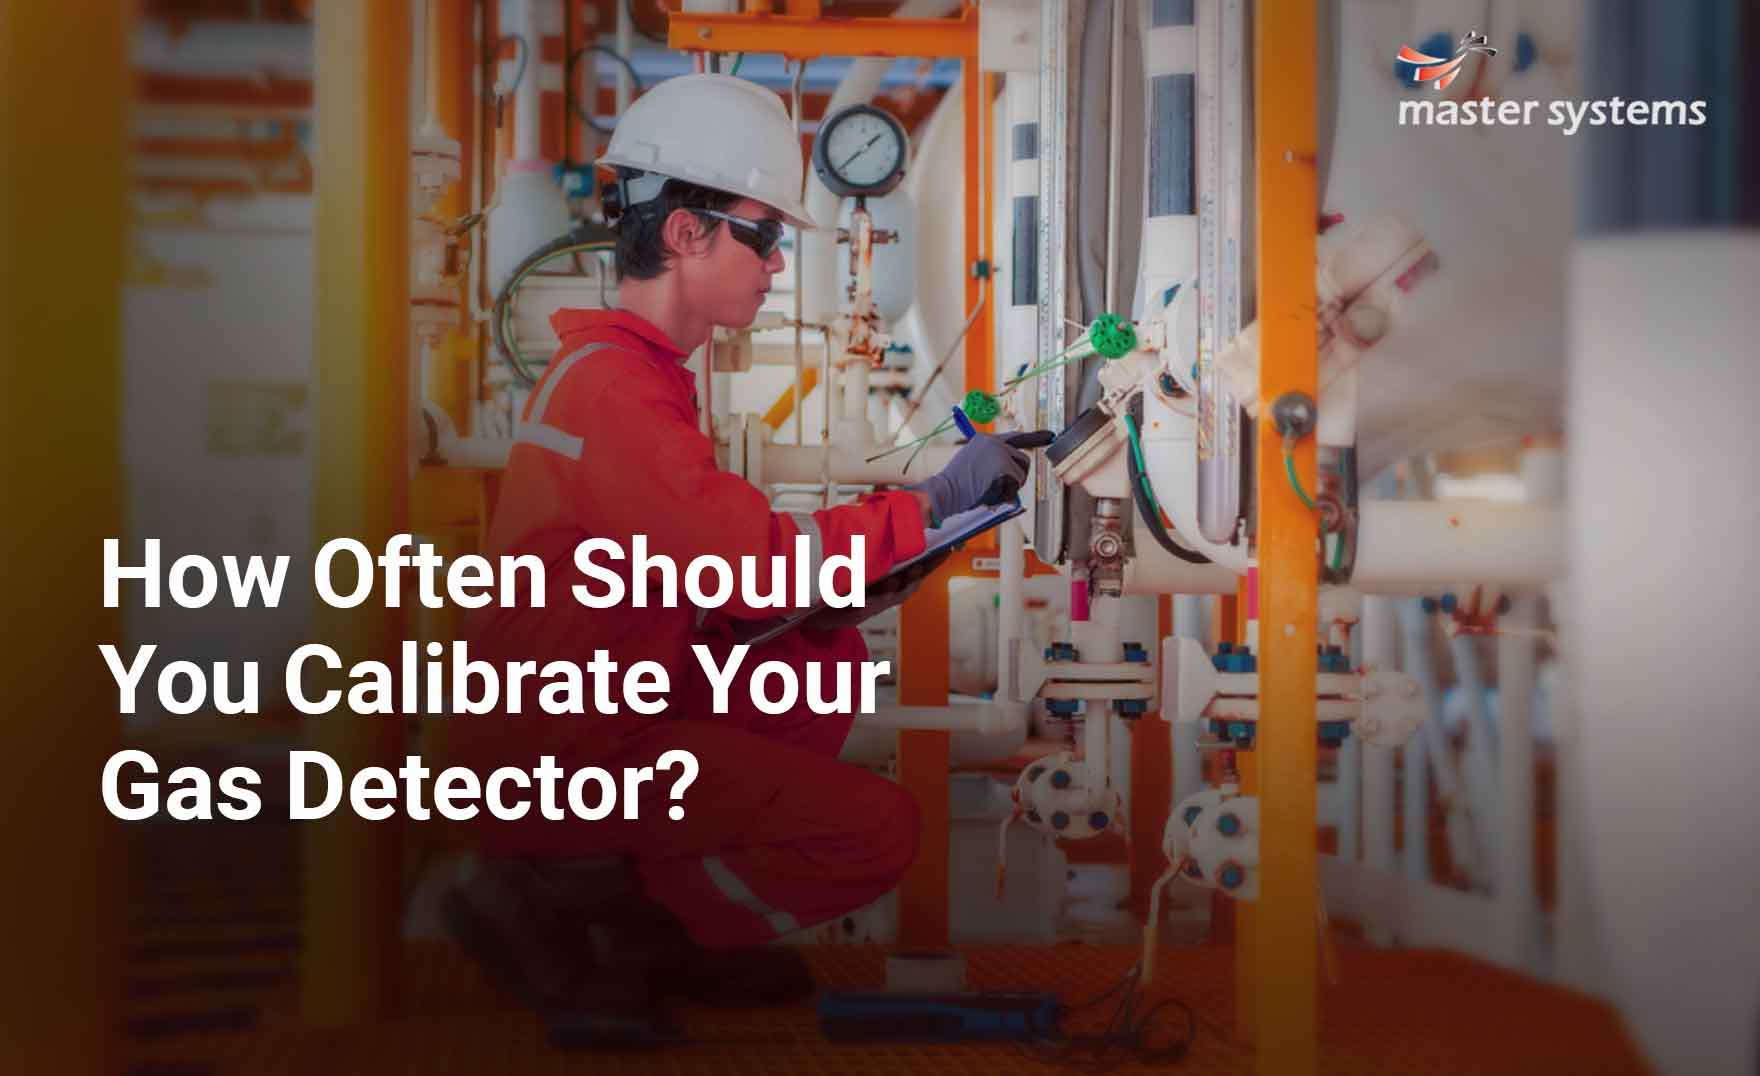 How Often Should You Calibrate Your Gas Detector